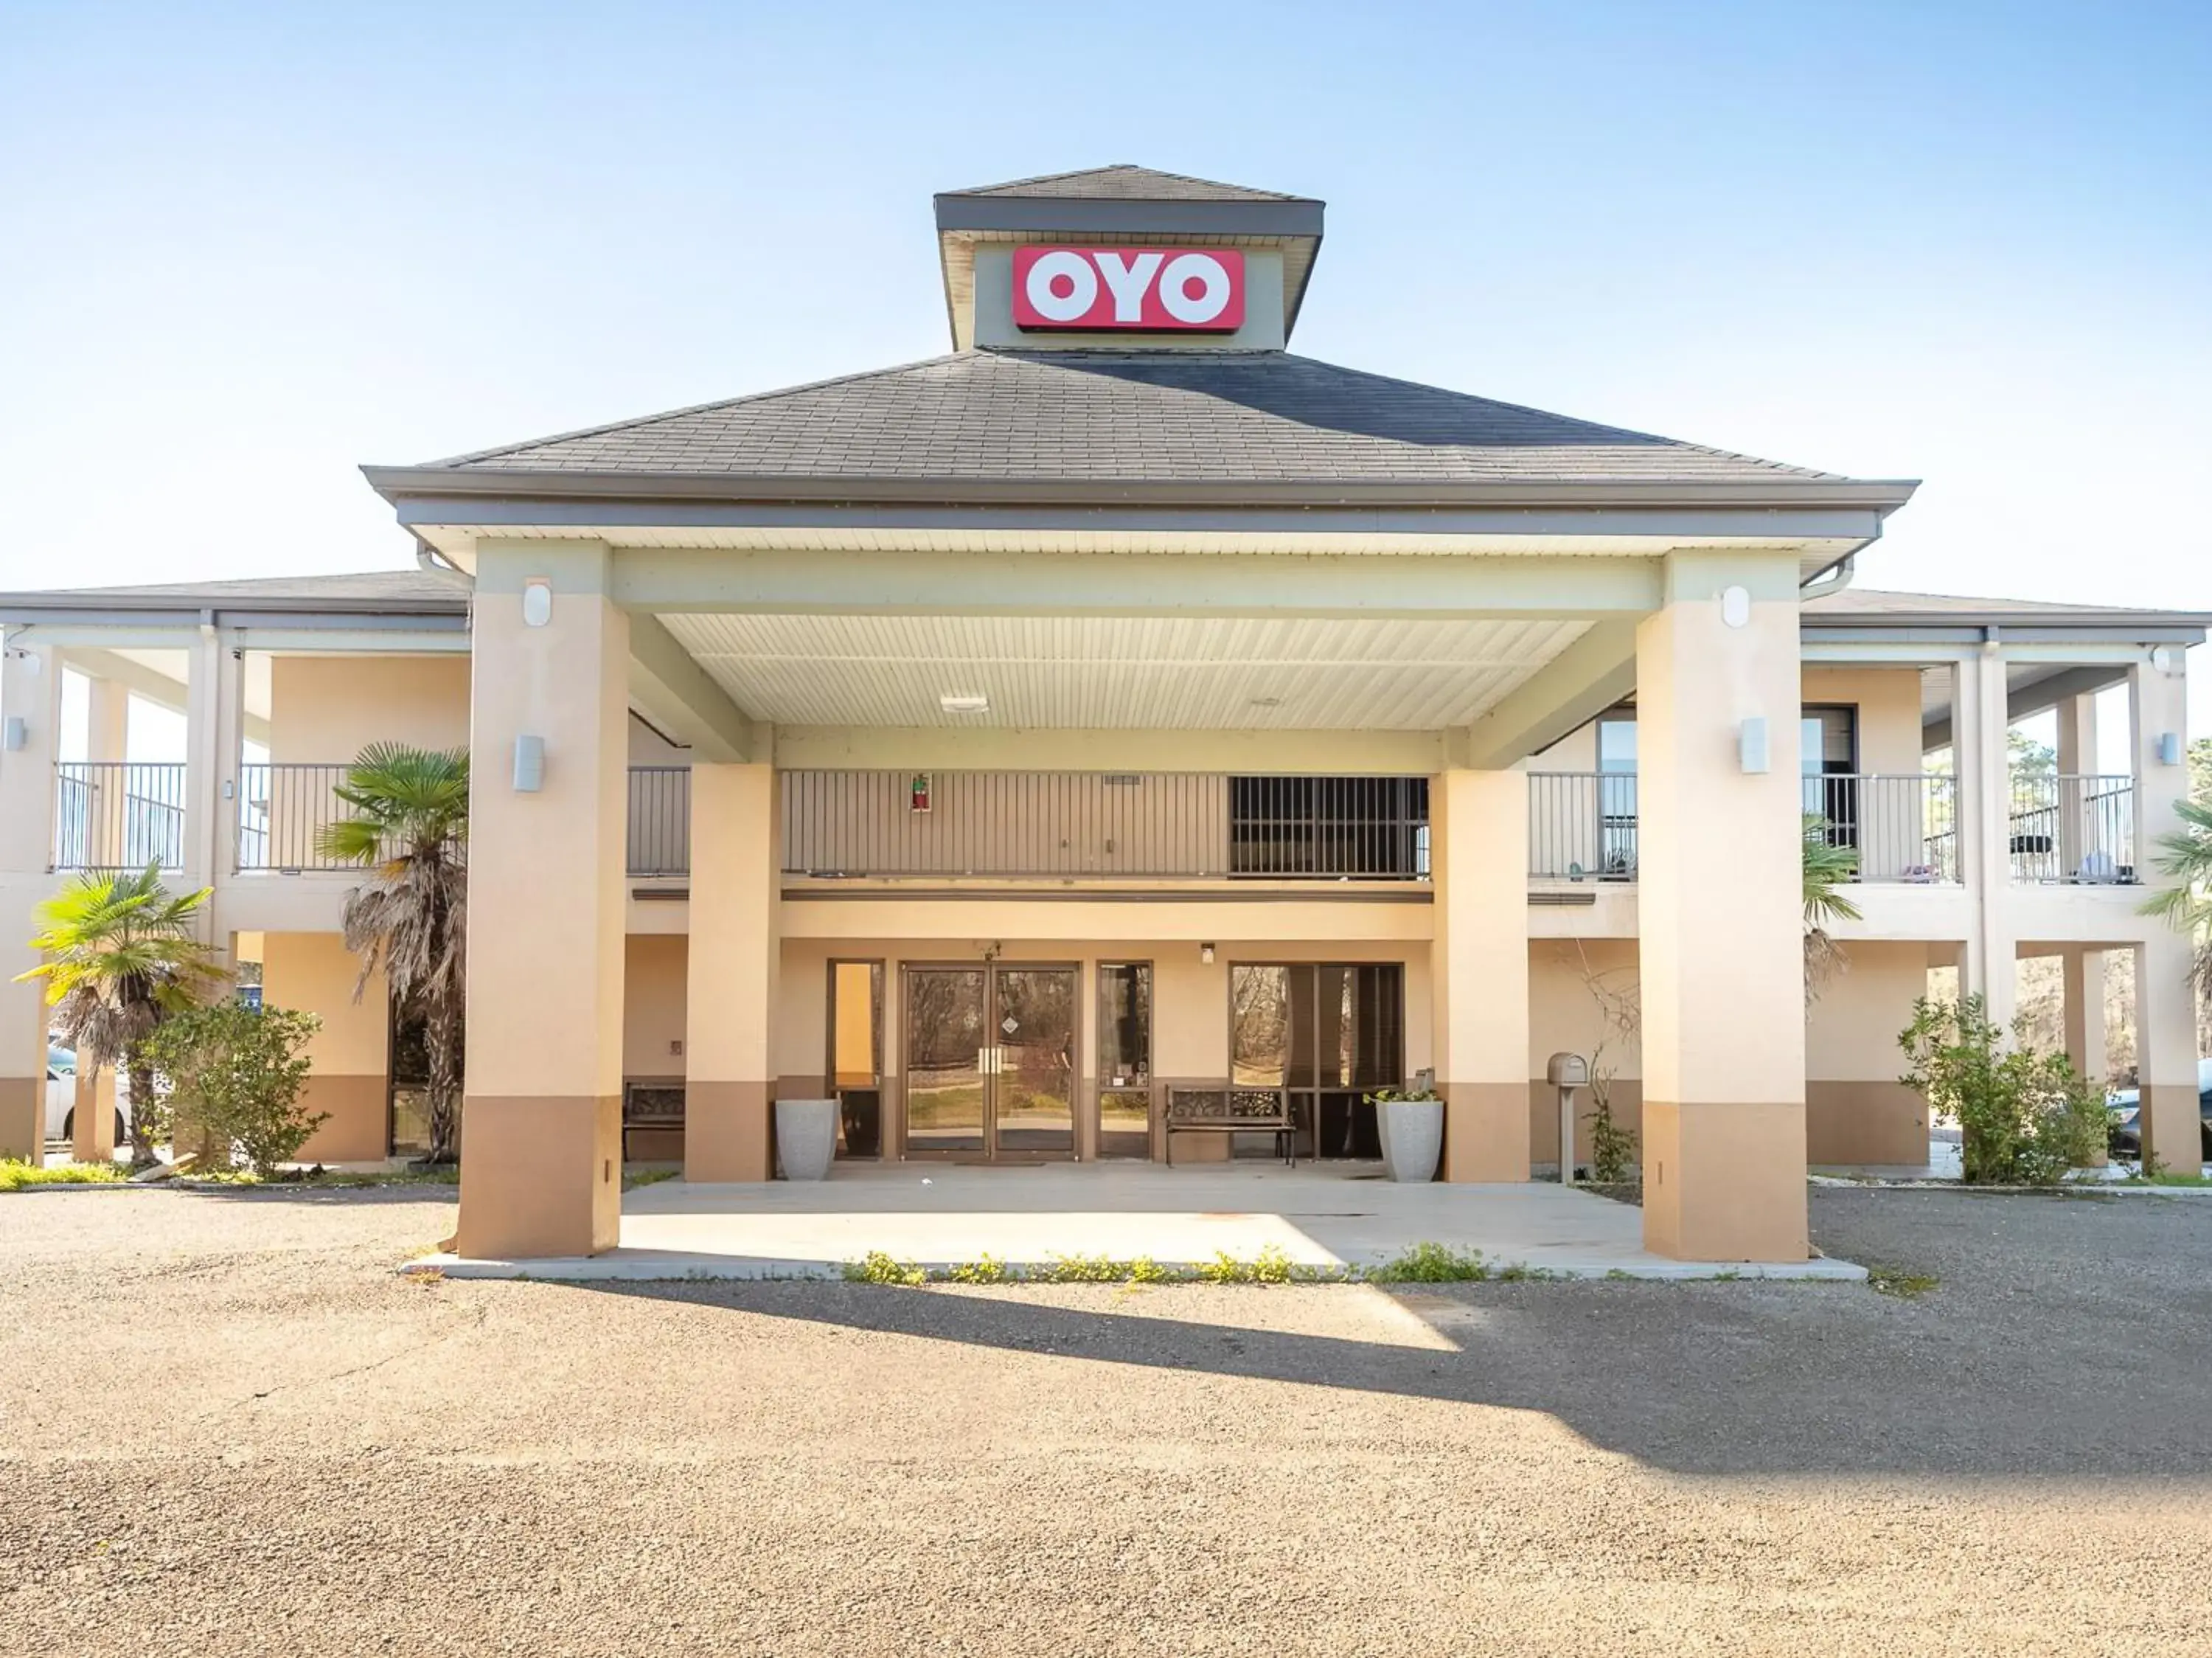 Property Building in OYO Hotel Kinder